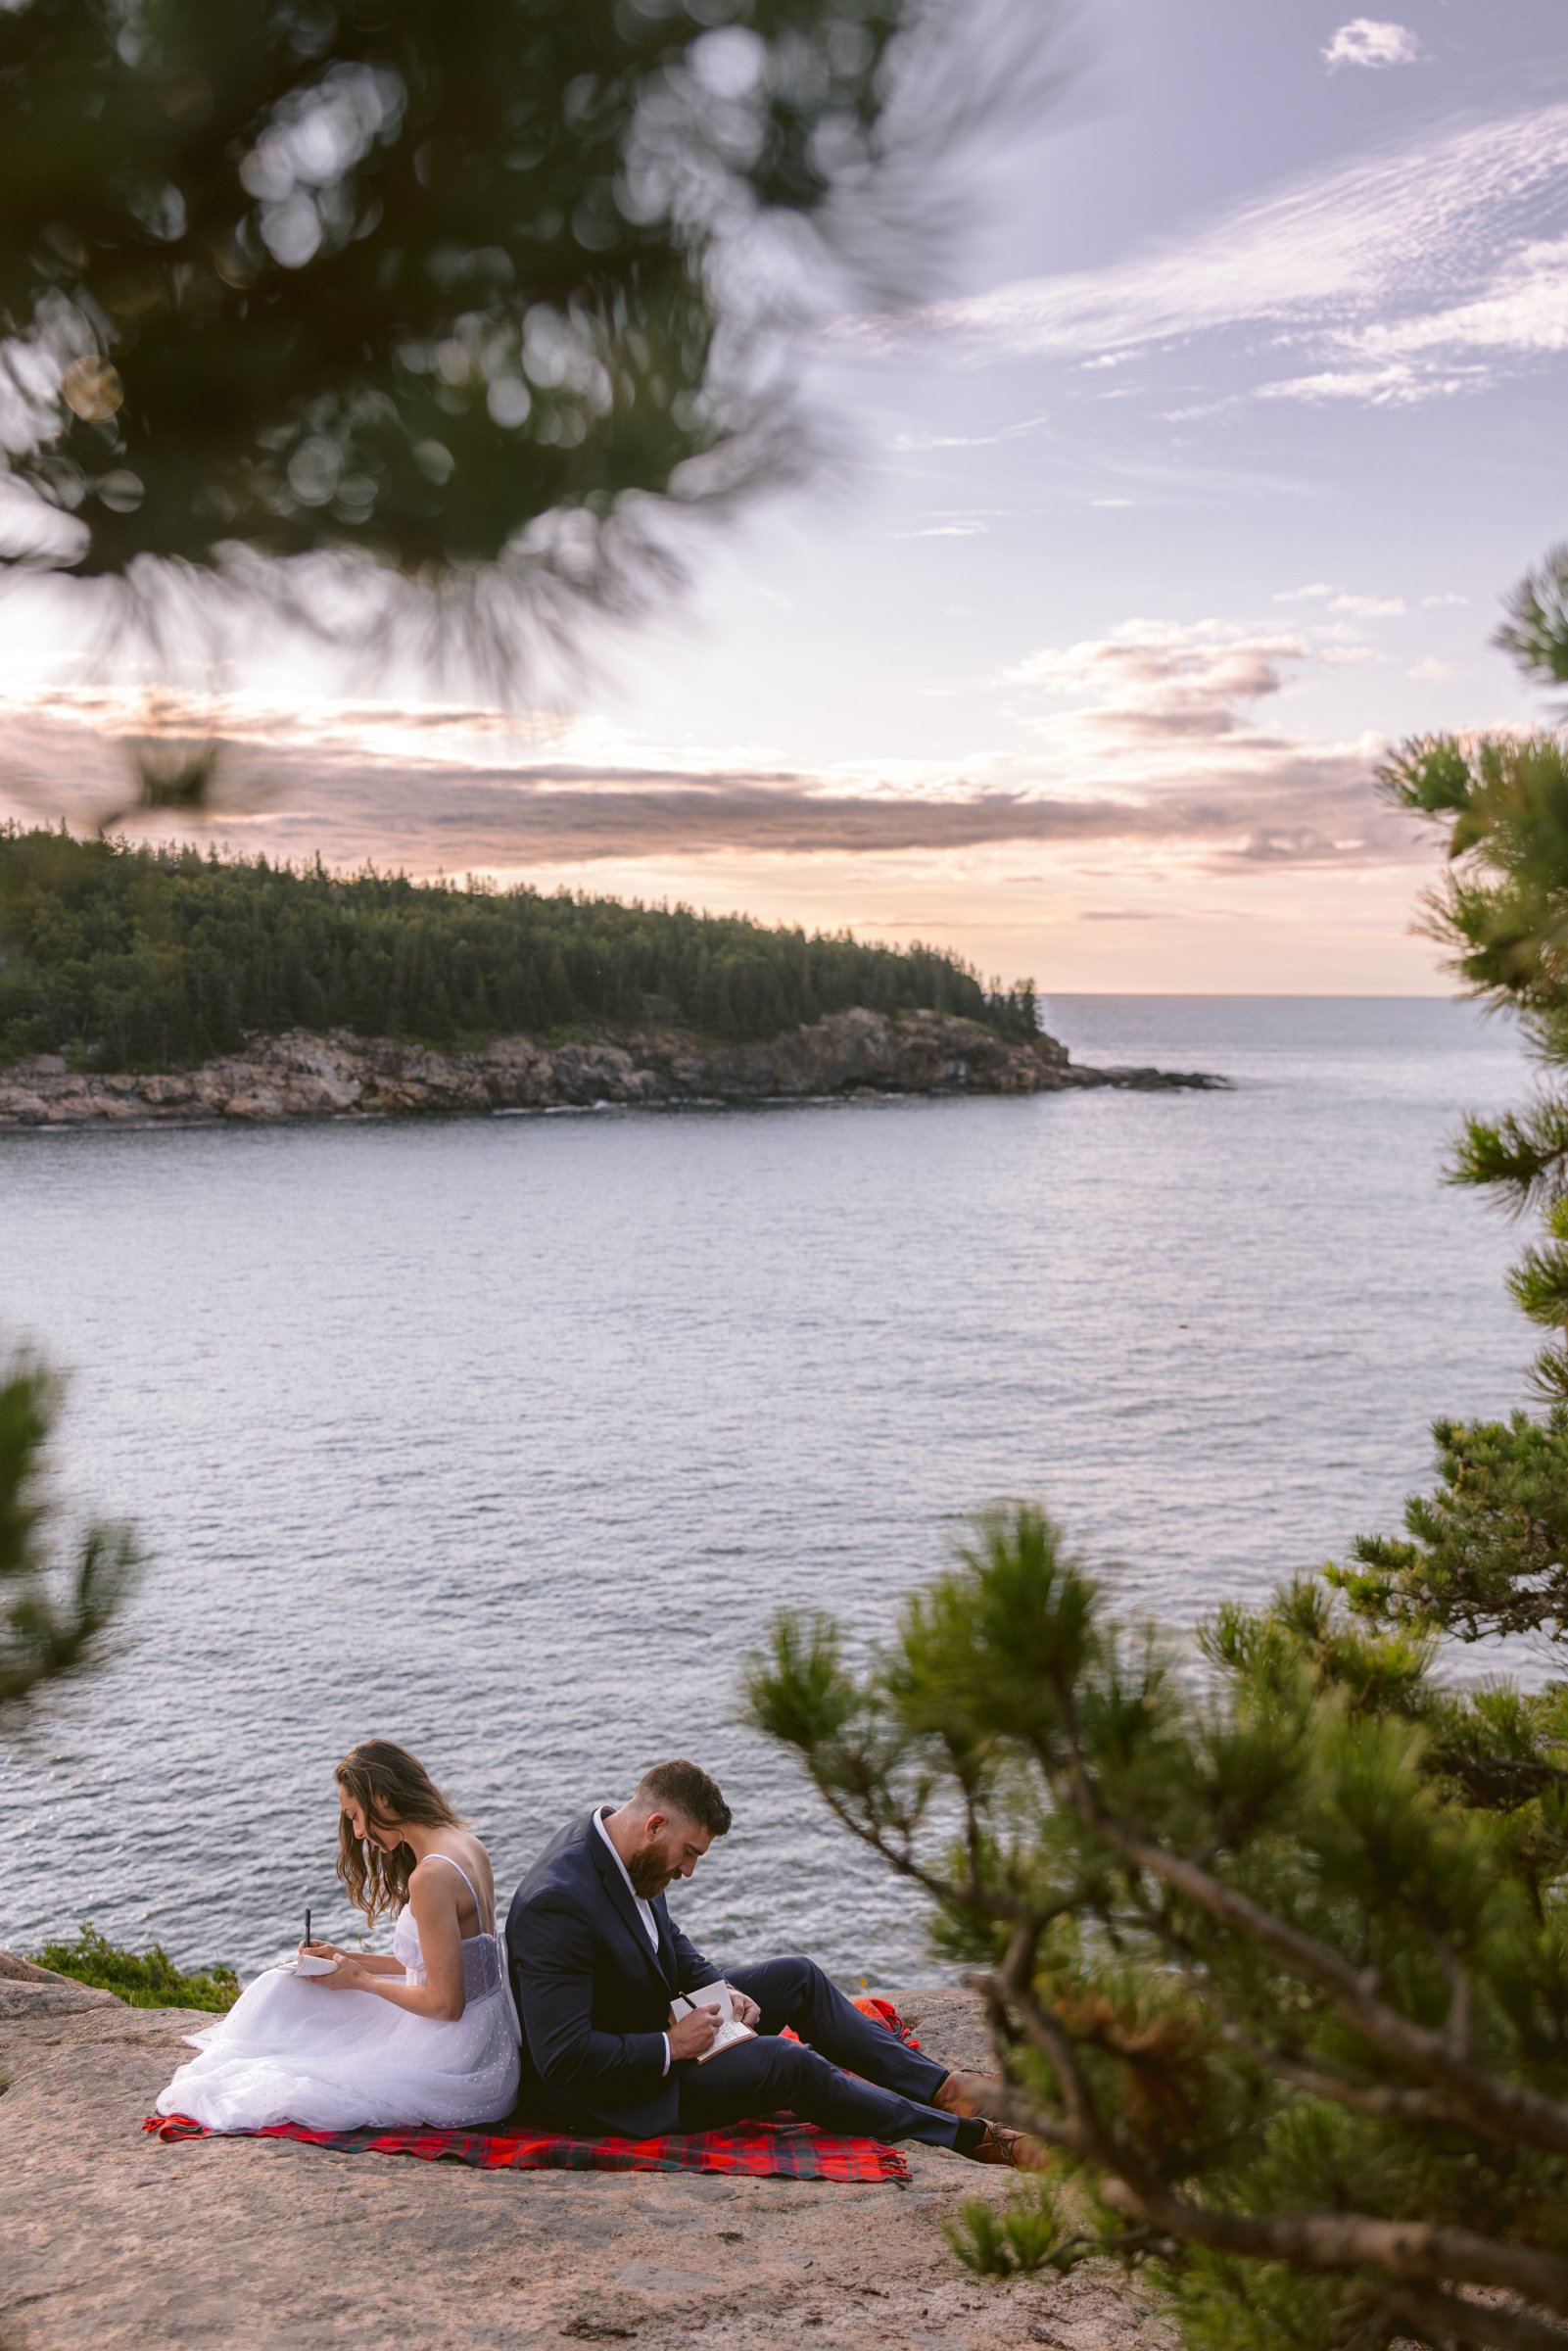 how-to-elope-in-acadia-national-park-maine-sand-beach-writing-vows-MoonRisingPhotography-1616.jpg